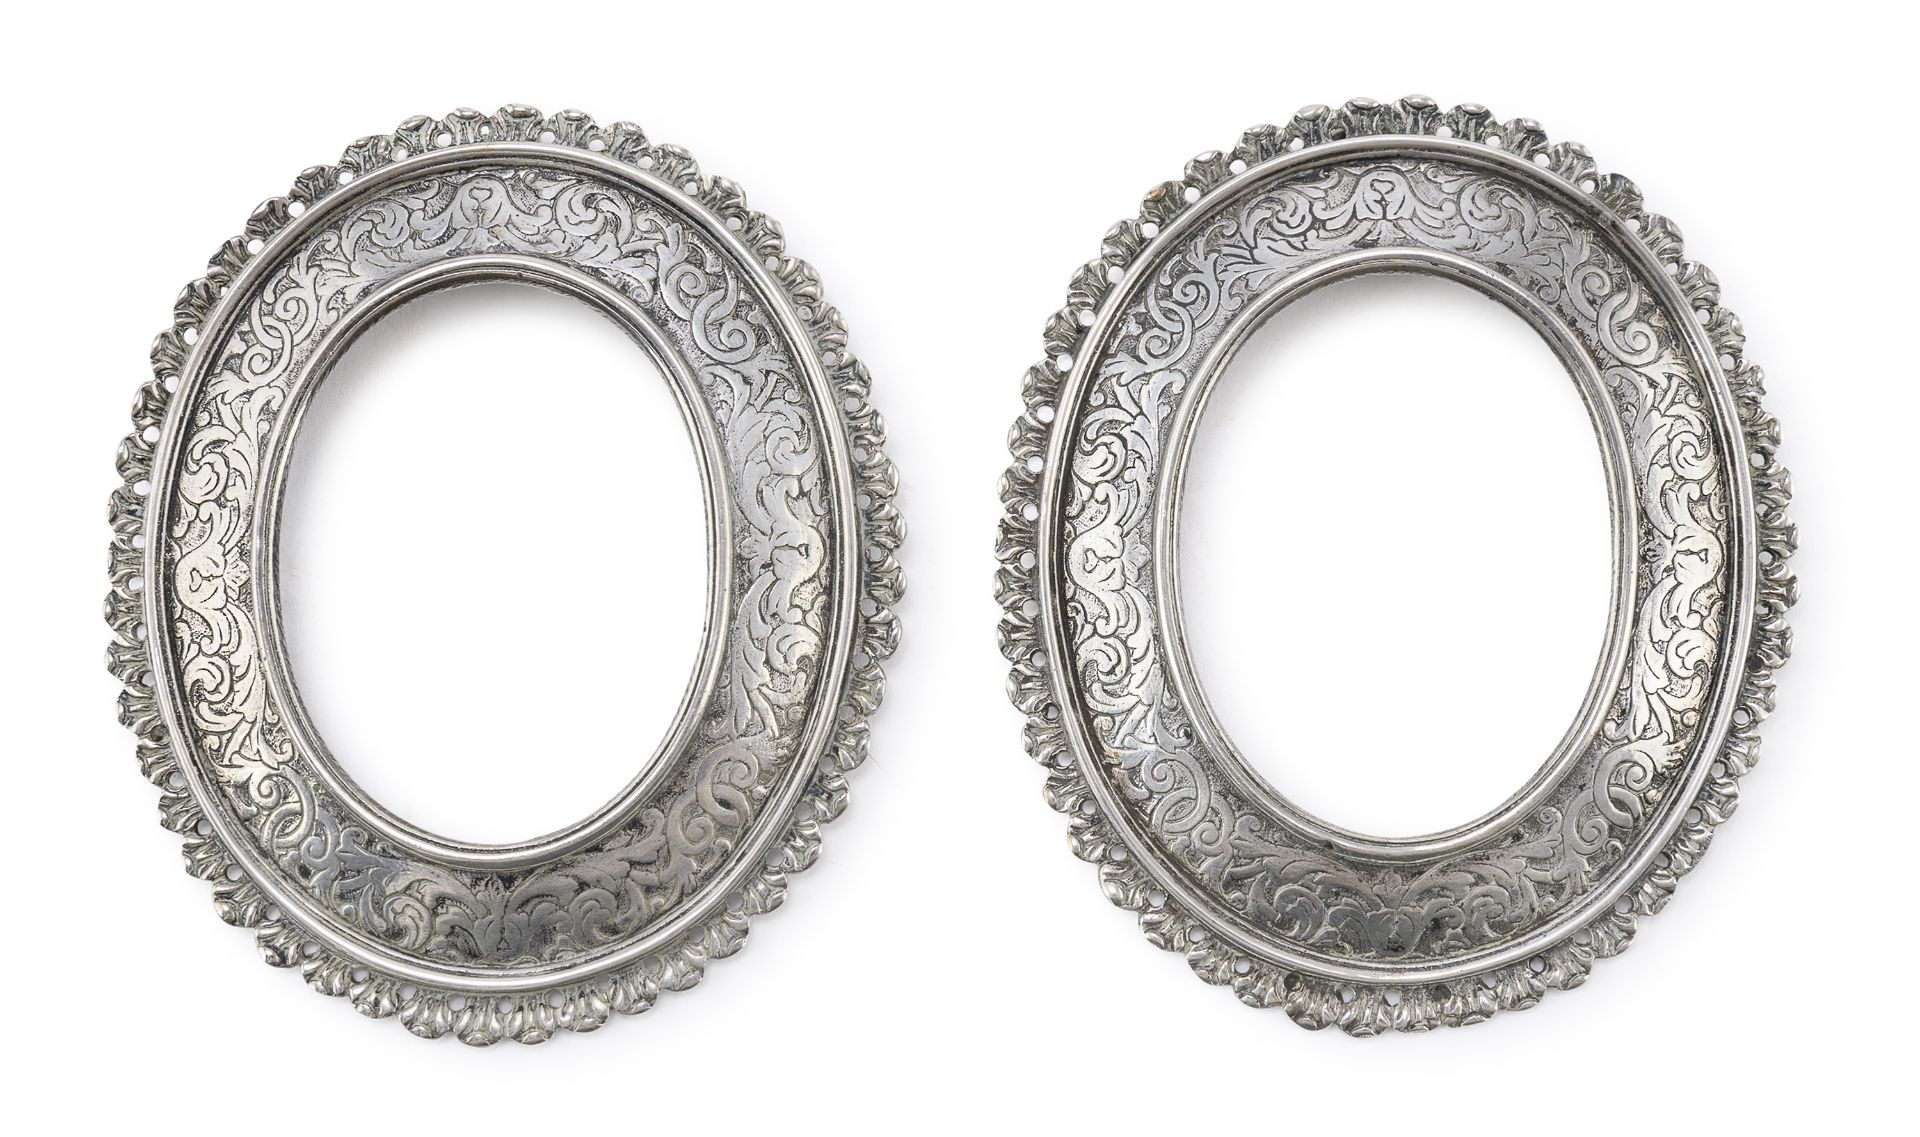 PAIR OF SMALL SILVER-PLATED BRONZE FRAMES 19TH CENTURY